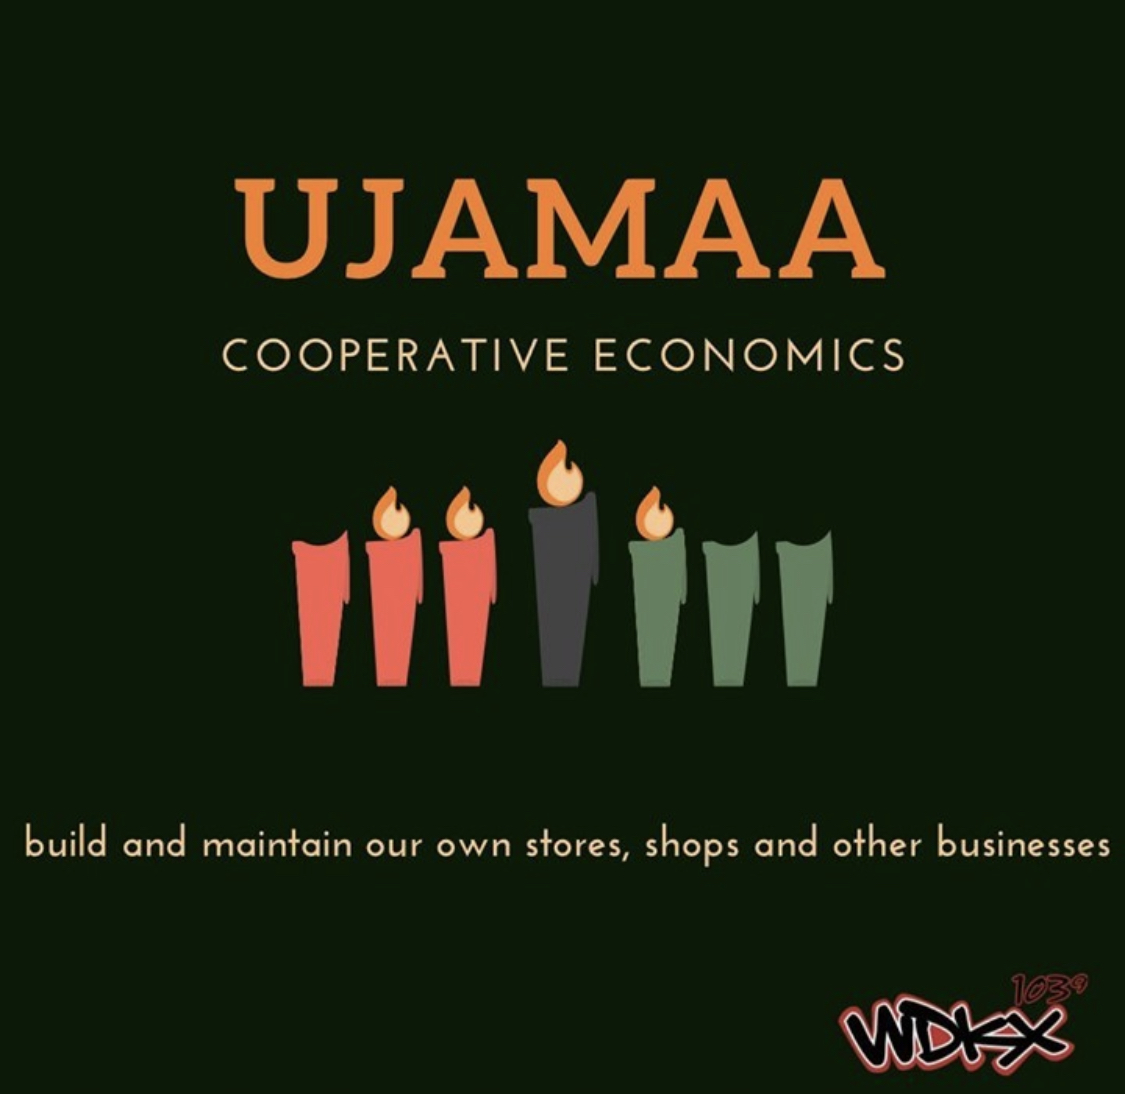 #buyblack #shopblack Visit the WDKX business directory on our website to see & support local businesses! Shoutout a Black owned business below or go to the Open Mic feature on the WDKX app for a chance for your shoutout to be aired live!